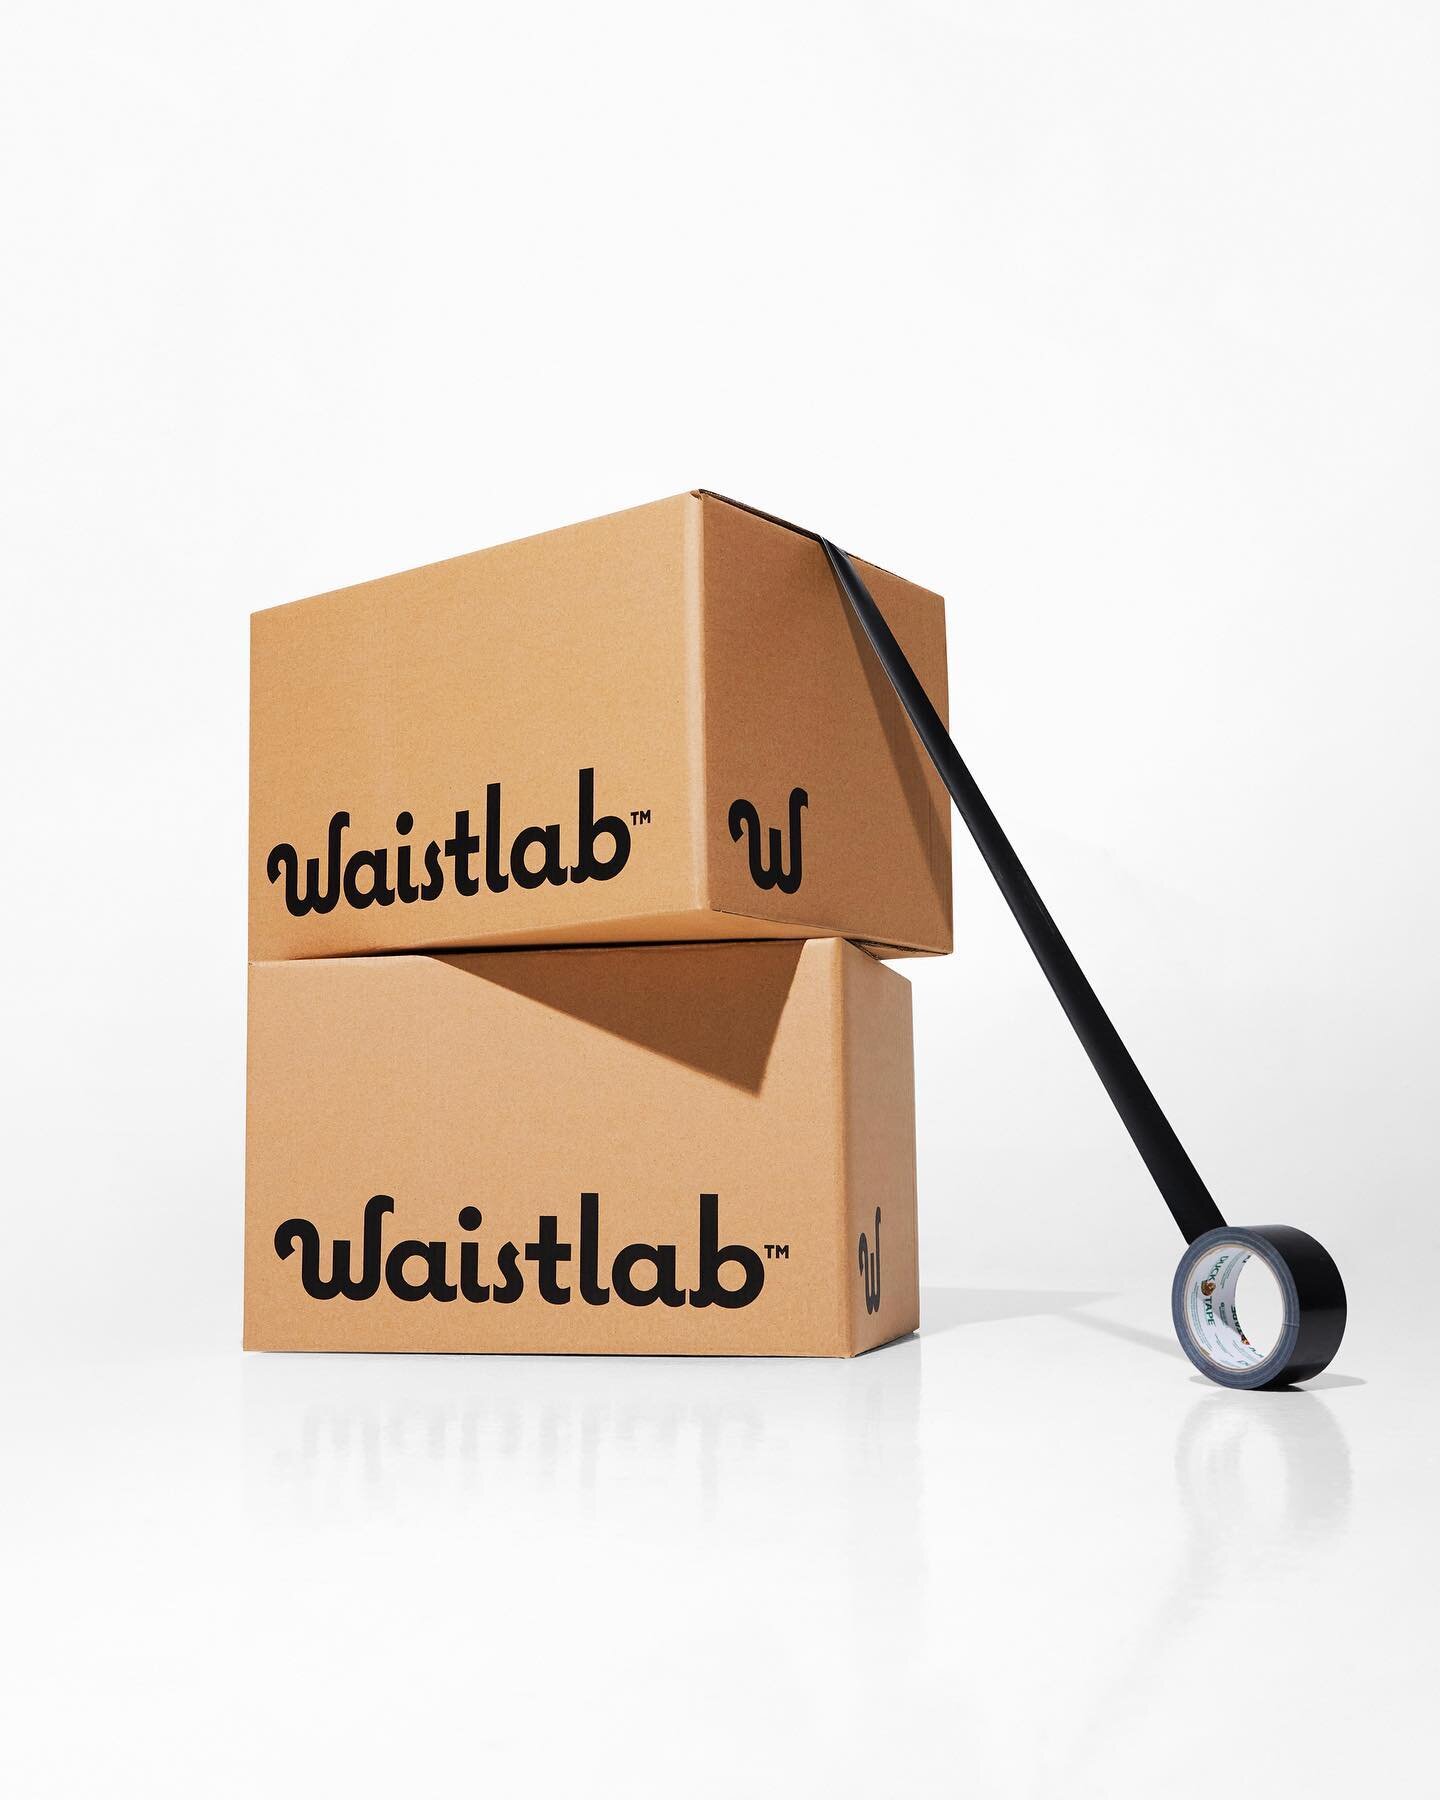 Product &amp; packaging photography for one of our most inspiring clients and friend, Waistlab. 📦😌

Photography by HeadQuartors

#productphotography #womenofwaistlab